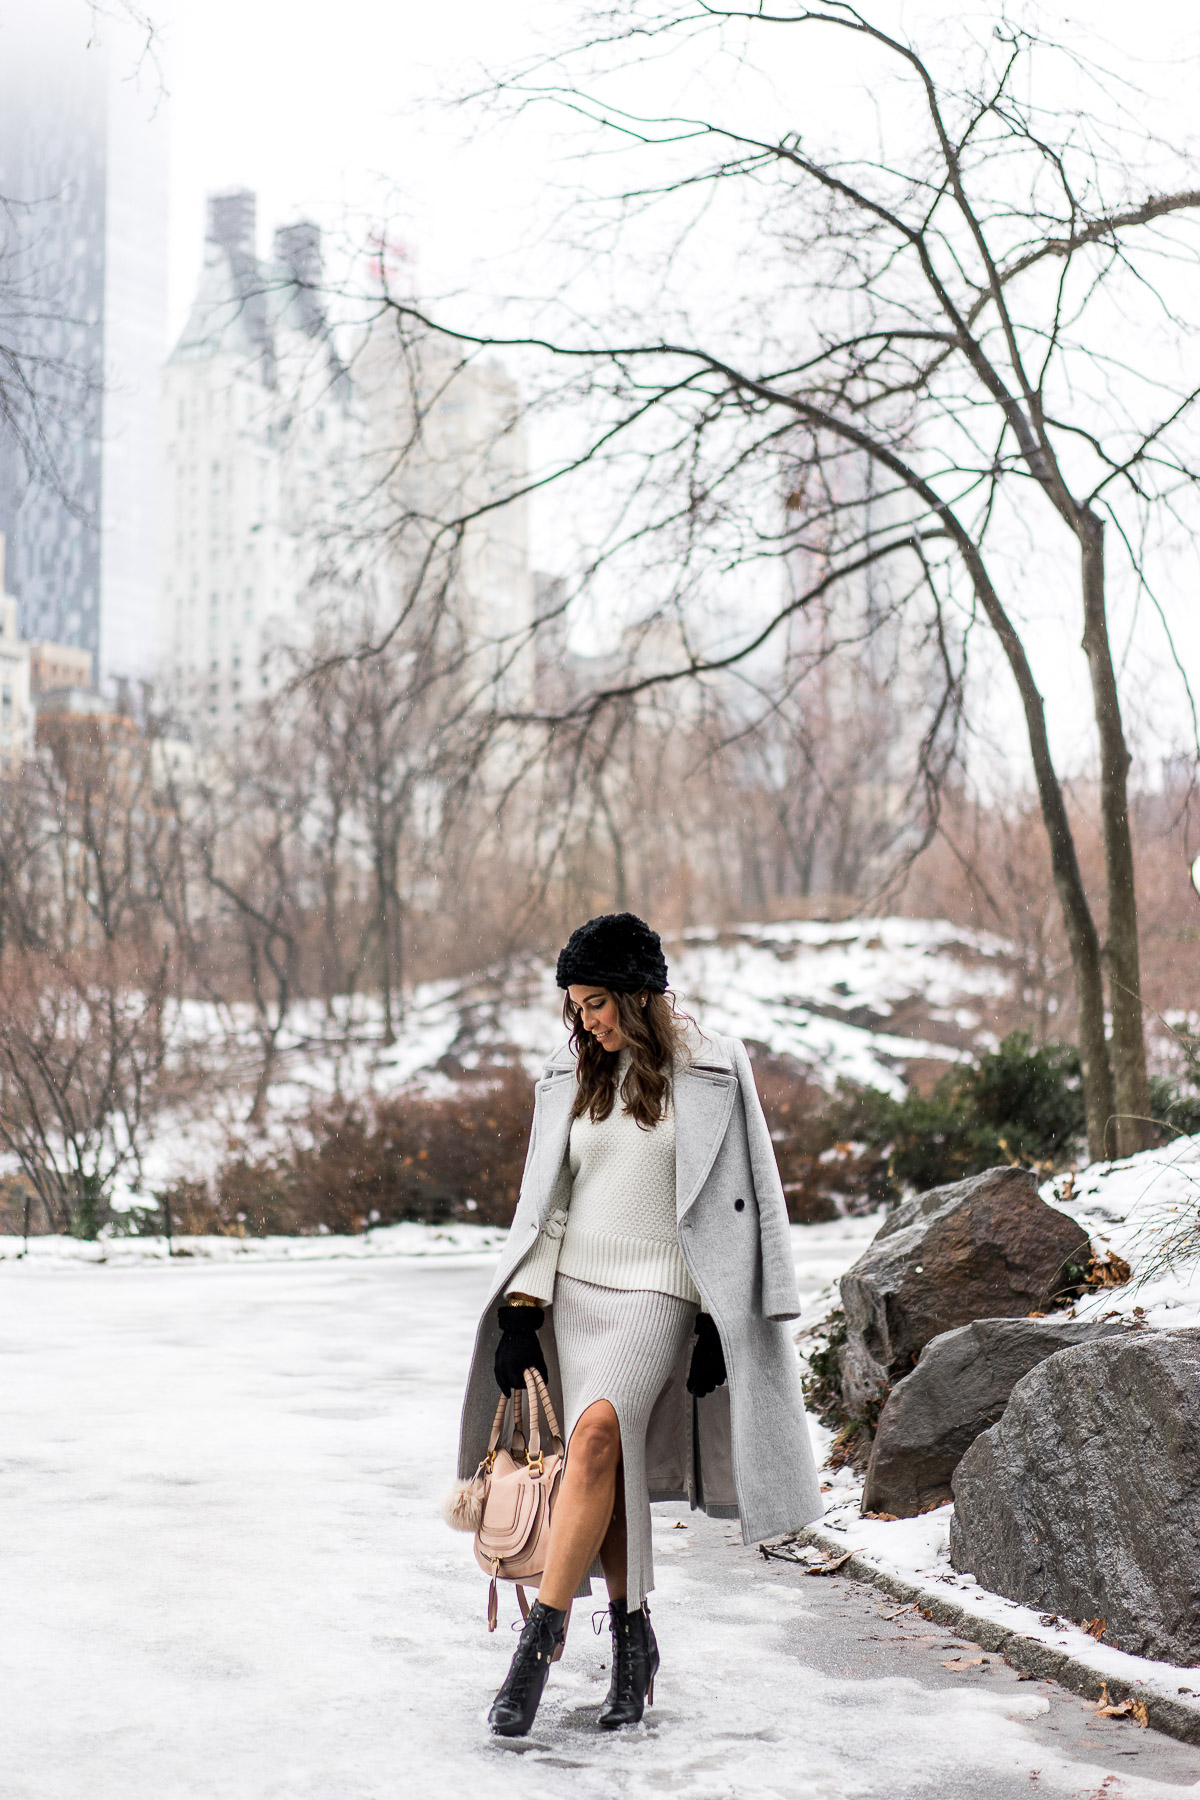 BCBGeneration skirt paired with Club Monaco Daylina coat and white knit sweater with blush nude Chloe Marcie bag by A Glam Lifestyle blogger Amanda during NYFW in Central Park